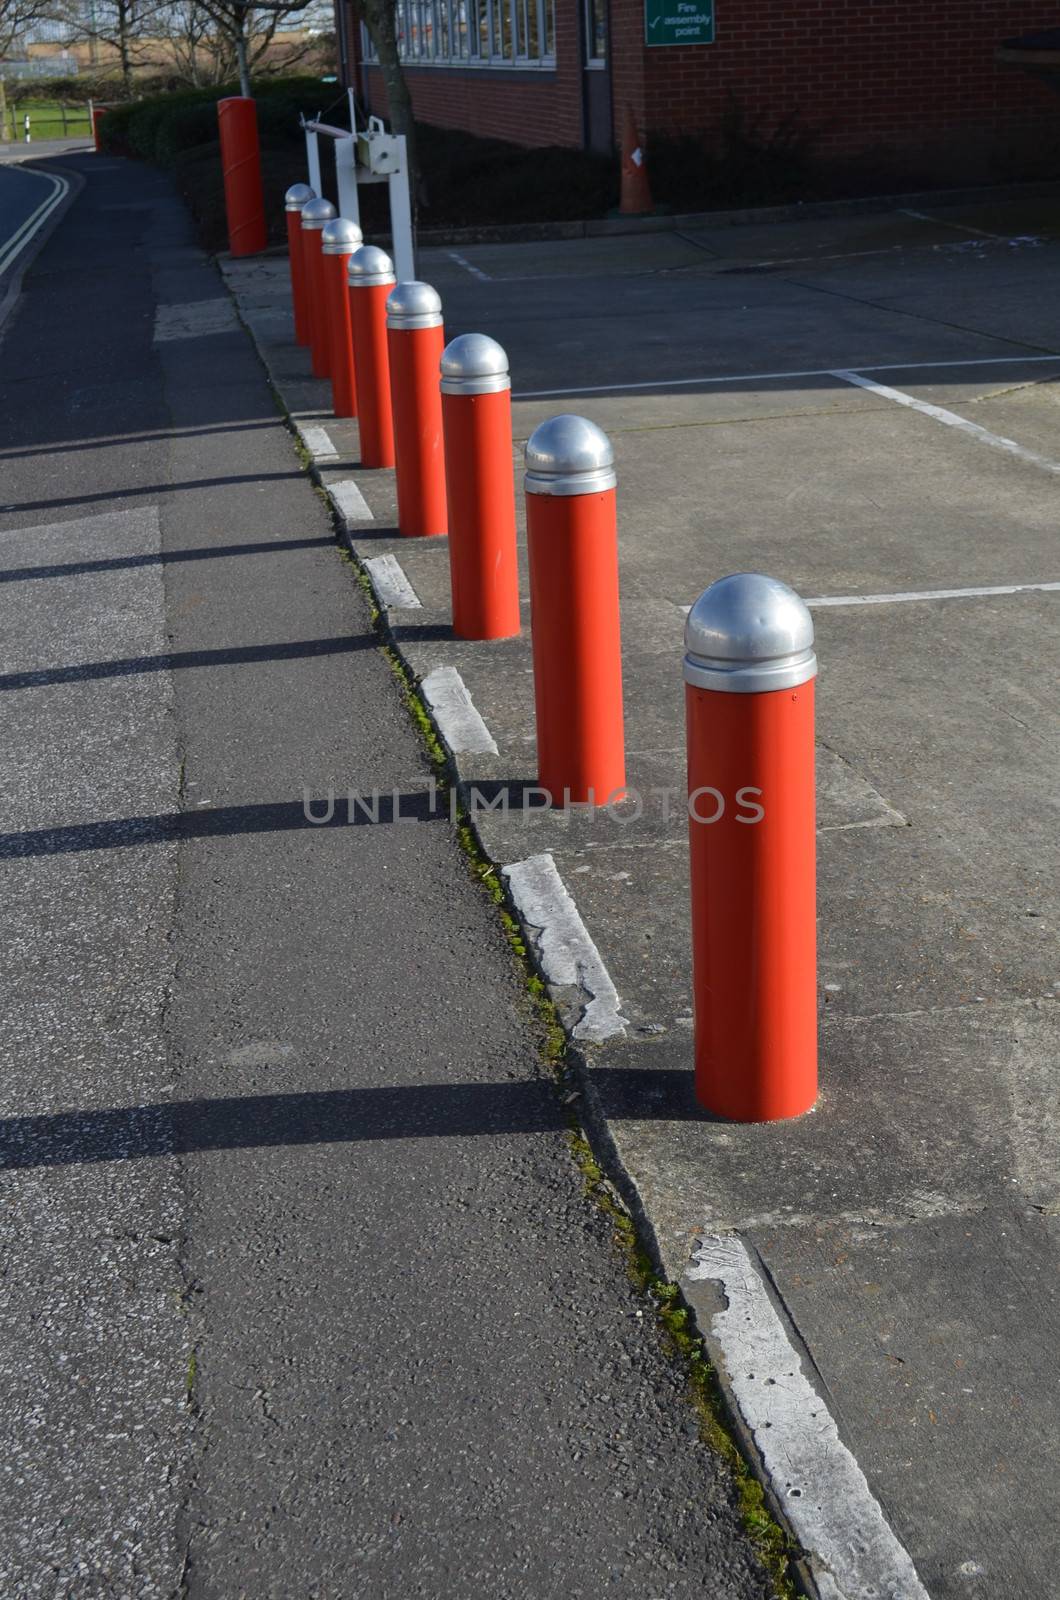 Steel security bollards in front of buildings to prevent crime and terrorism threats.